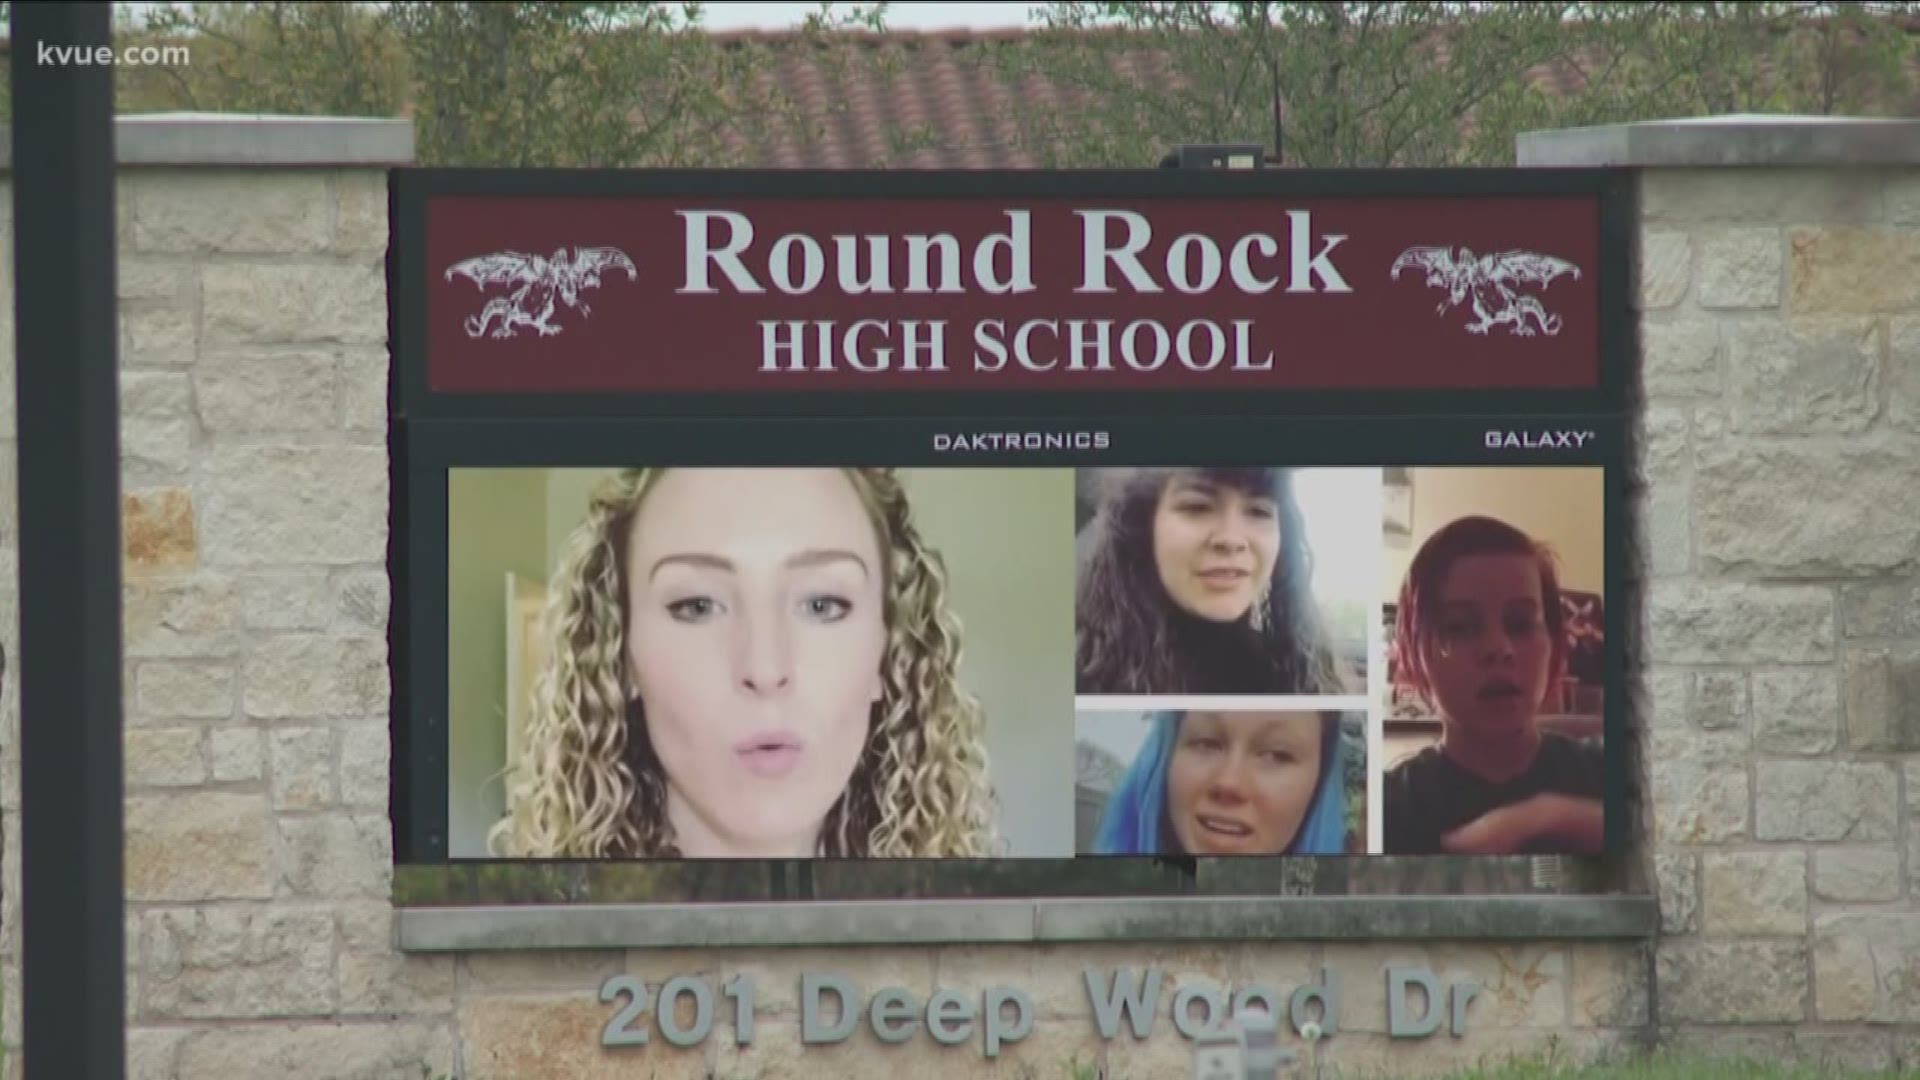 They typically sing together every week, but one Round Rock ISD choir has had to get creative during coronavirus shutdowns.